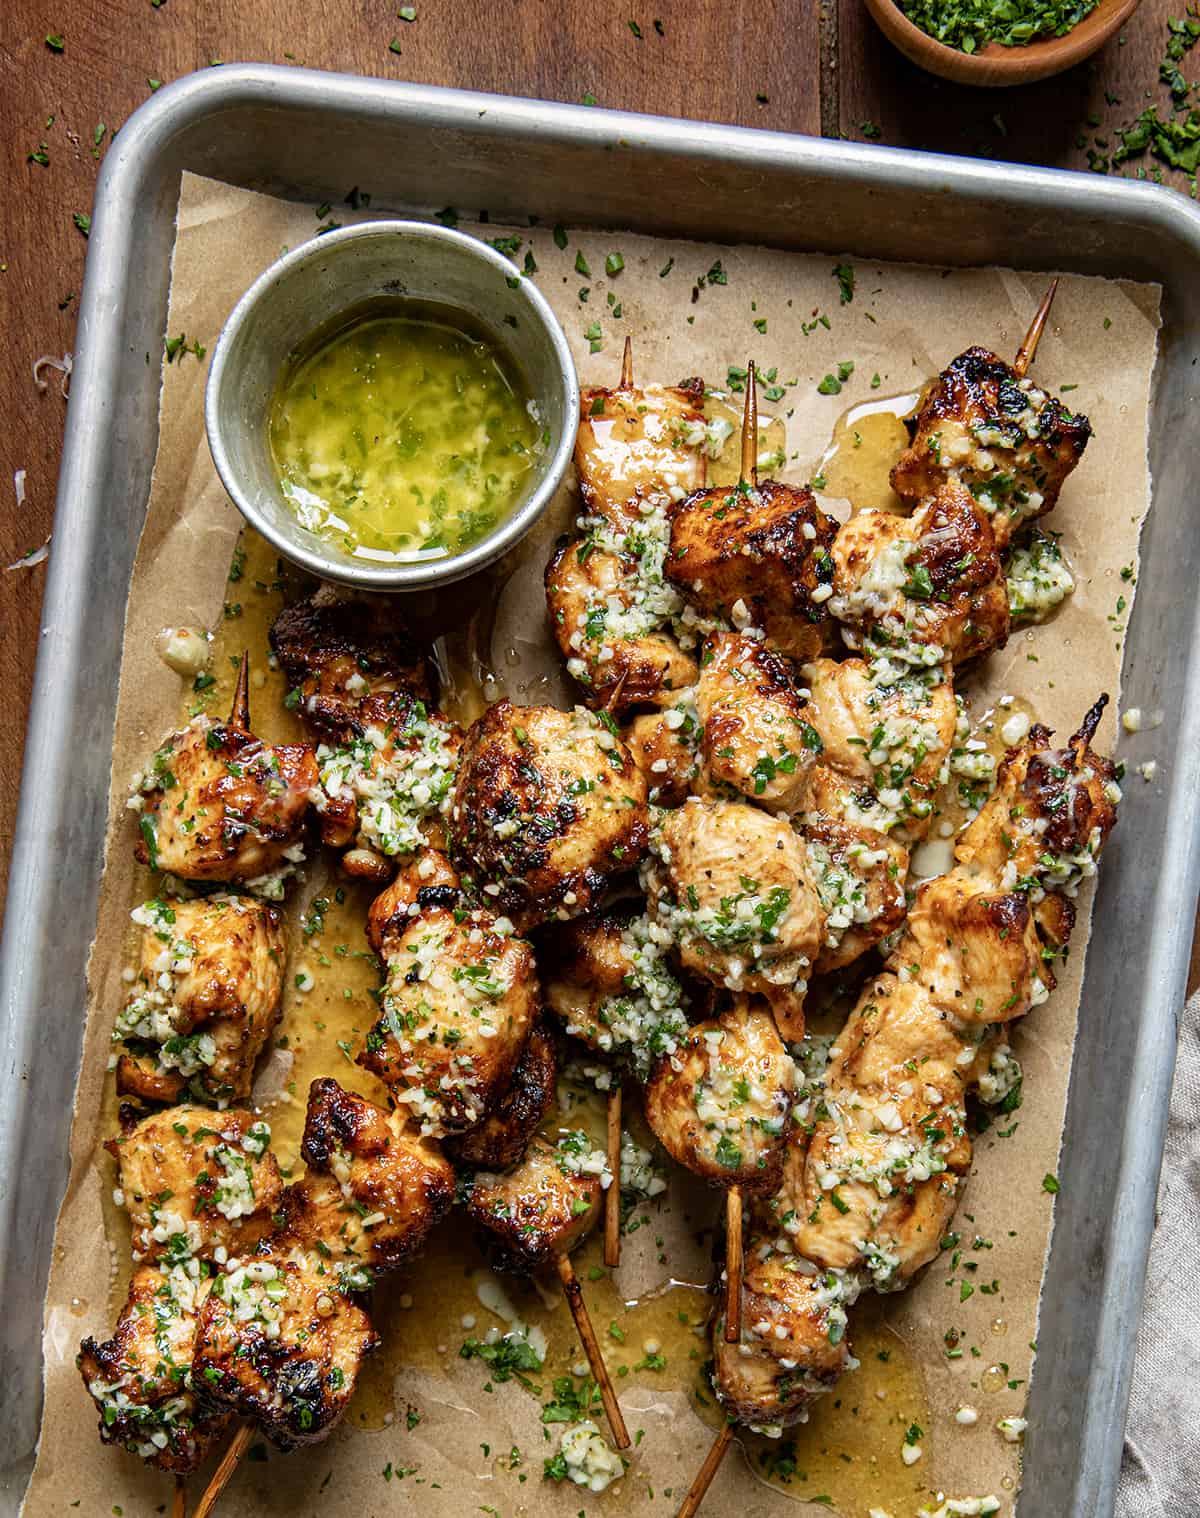 Pan of Garlic Parmesan Chicken Skewers with garlic butter on a wooden table from overhead.